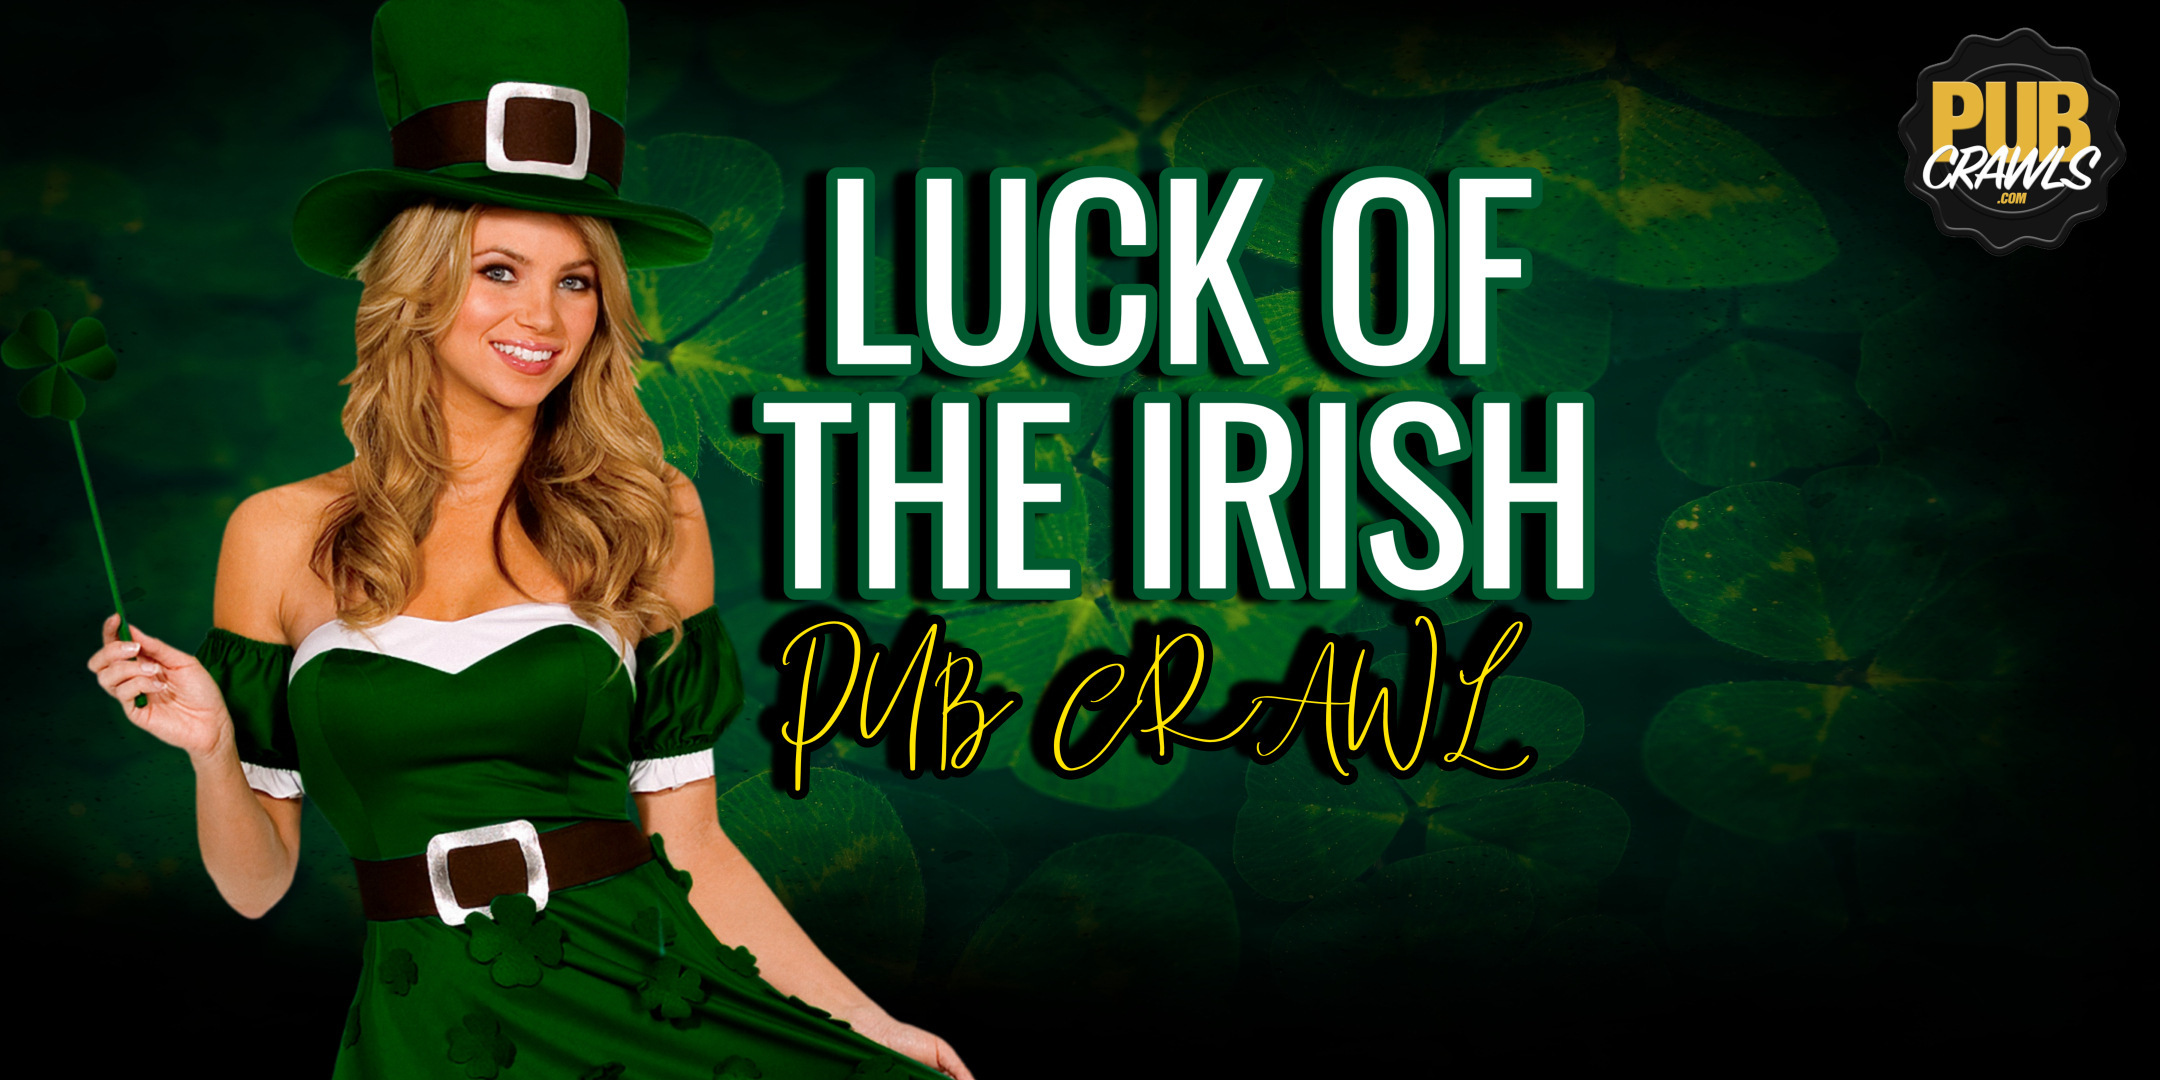 Boston Faneuil Hall Luck Of The Irish St Patrick's Day Weekend Pub Crawl	